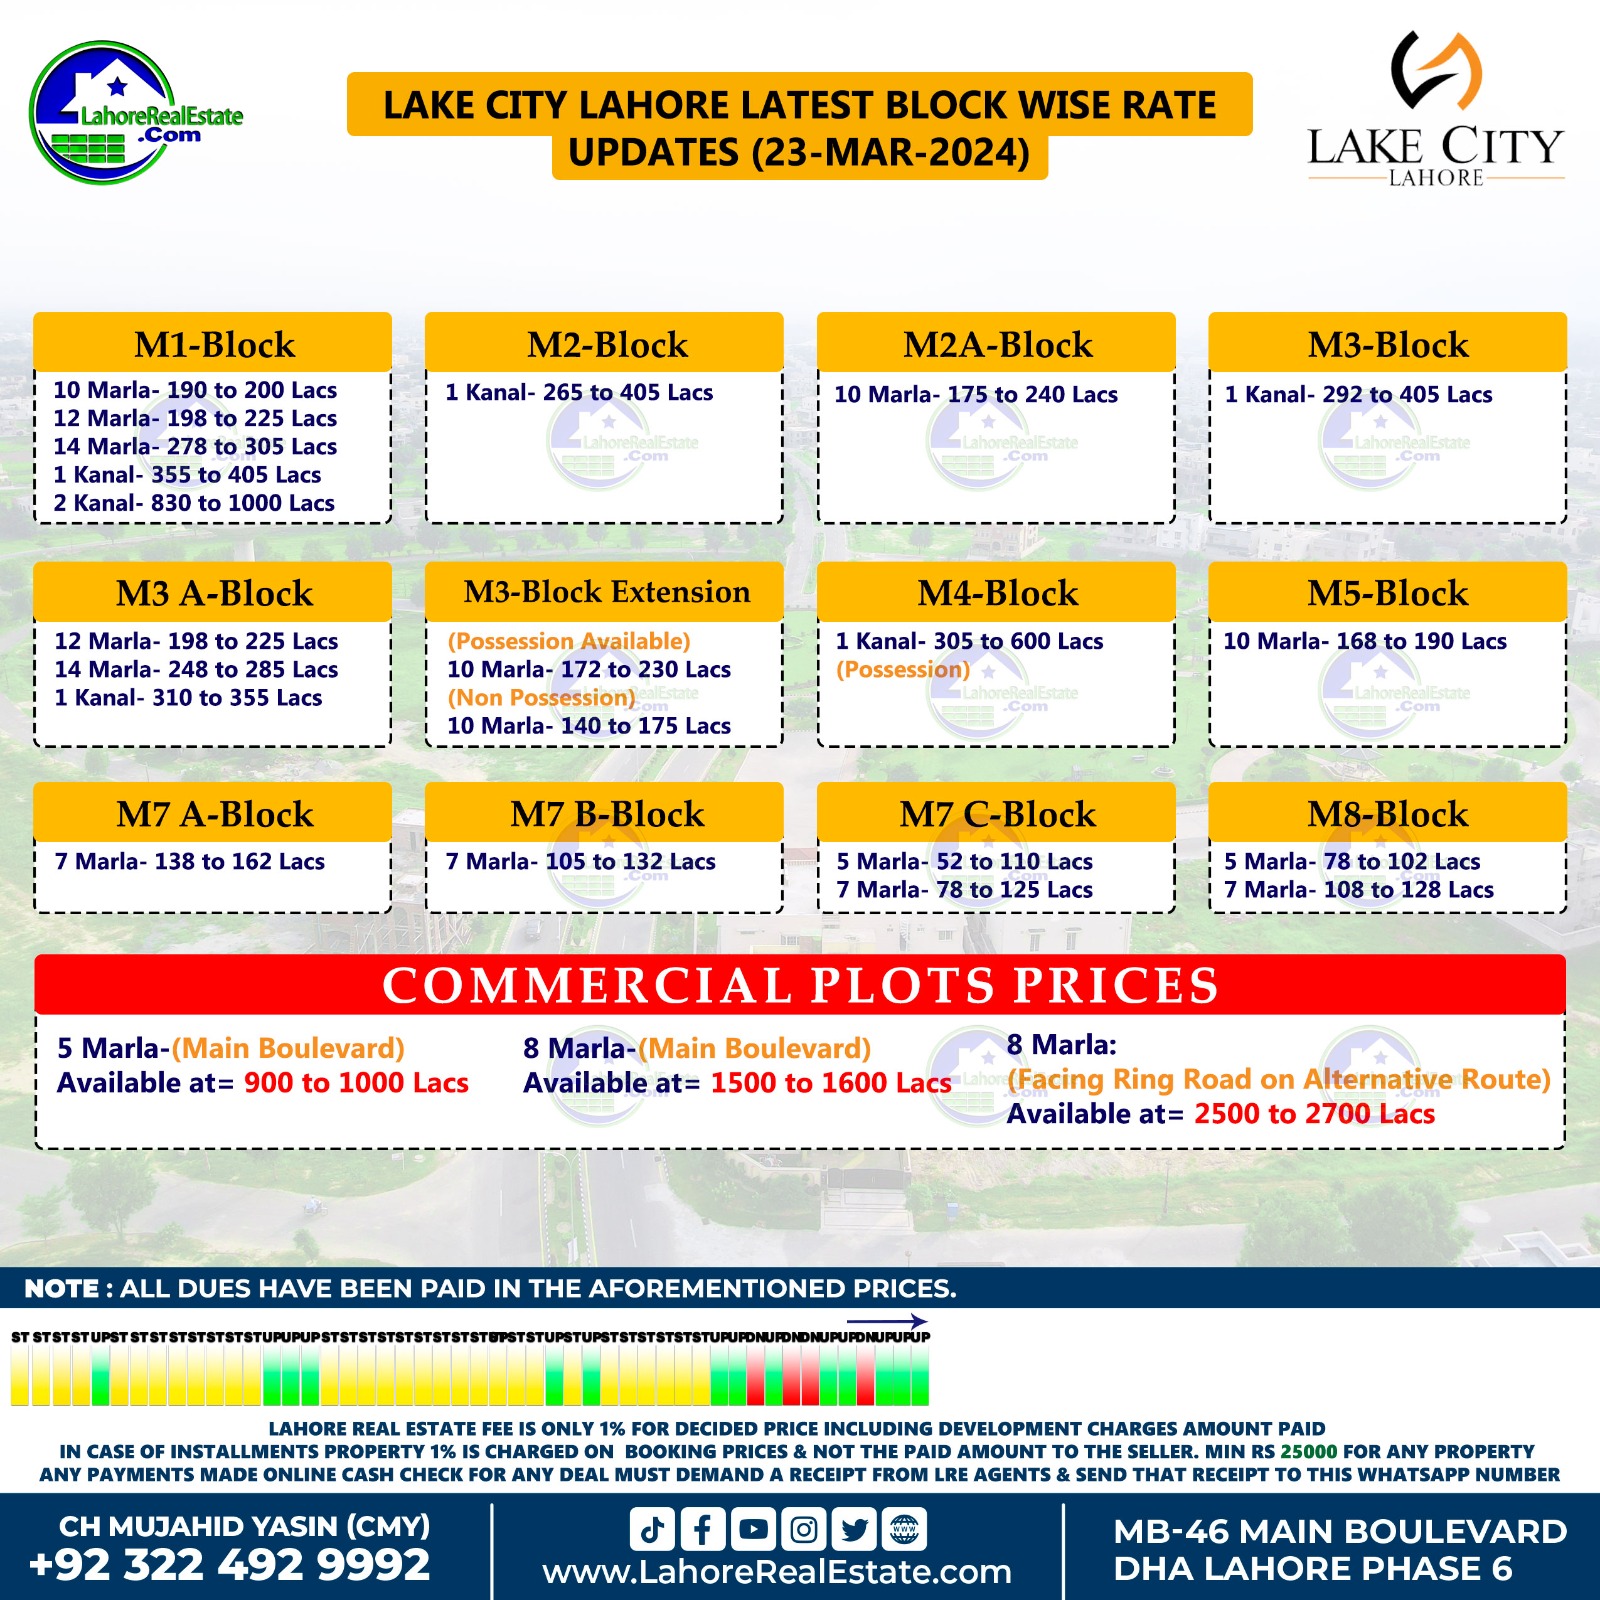 Lake City Lahore Plot Prices Update March 25, 2024